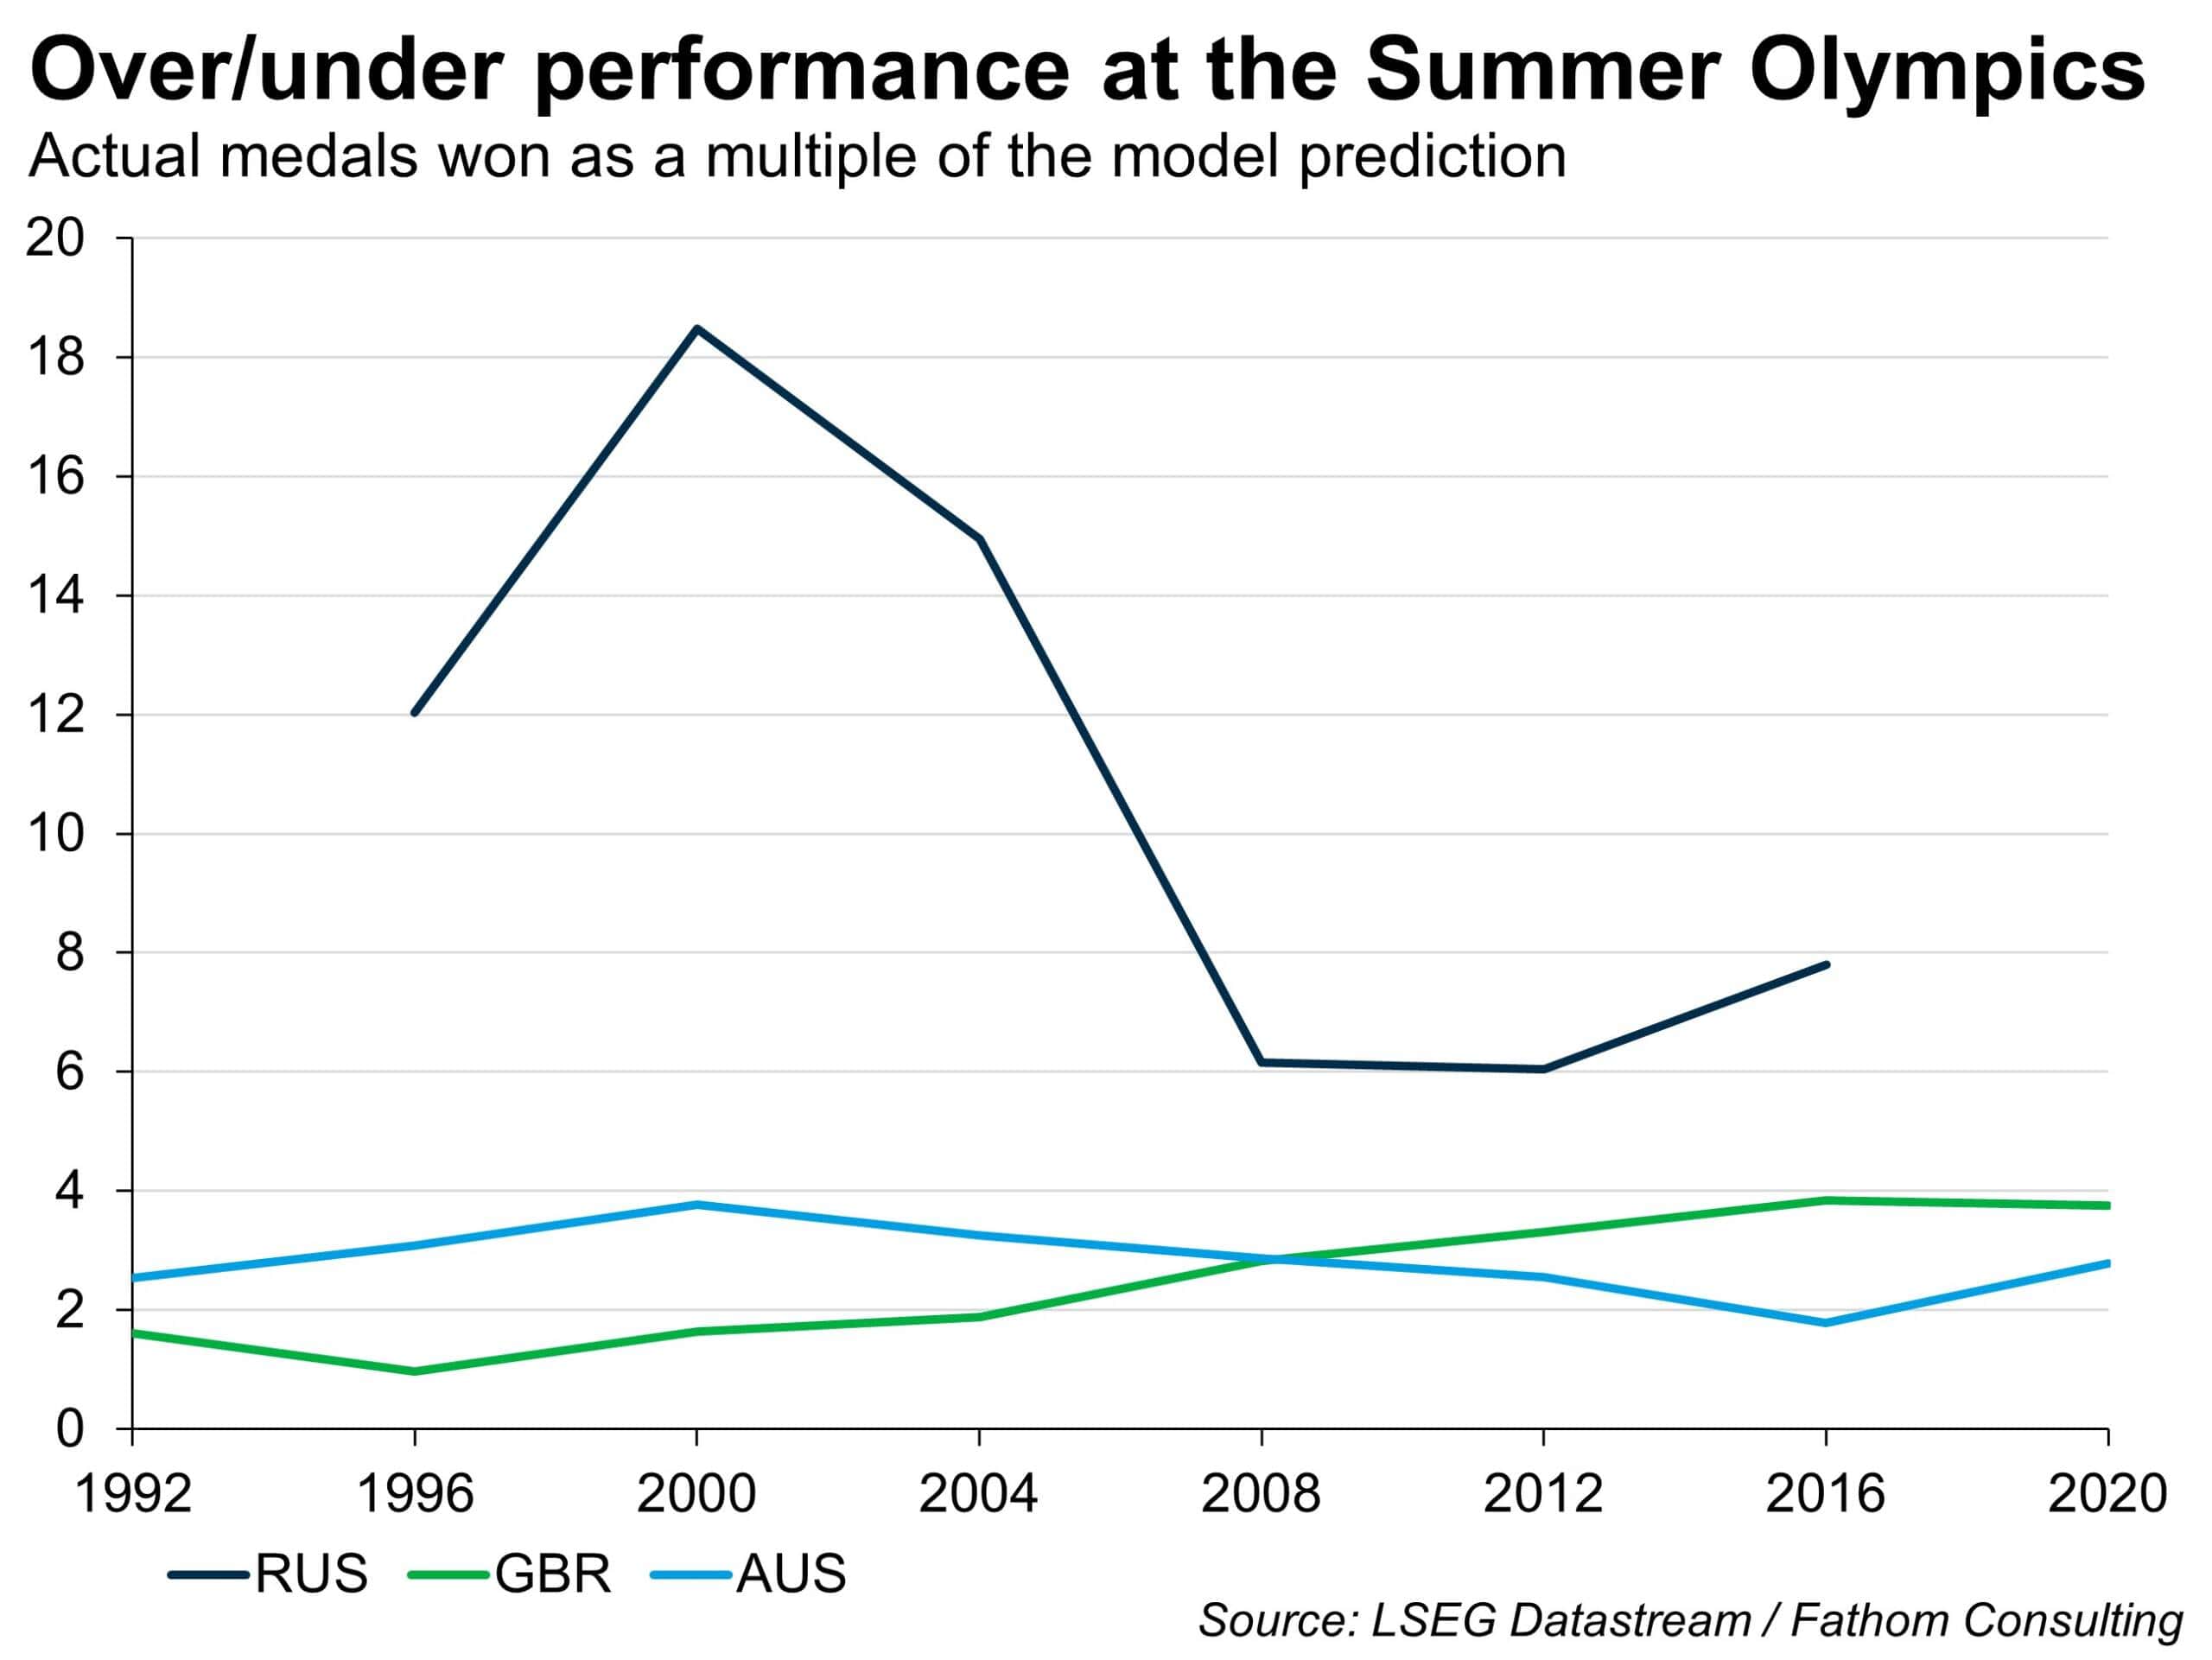 Will the UK outperform again at the XXXIII Olympiad in Paris?